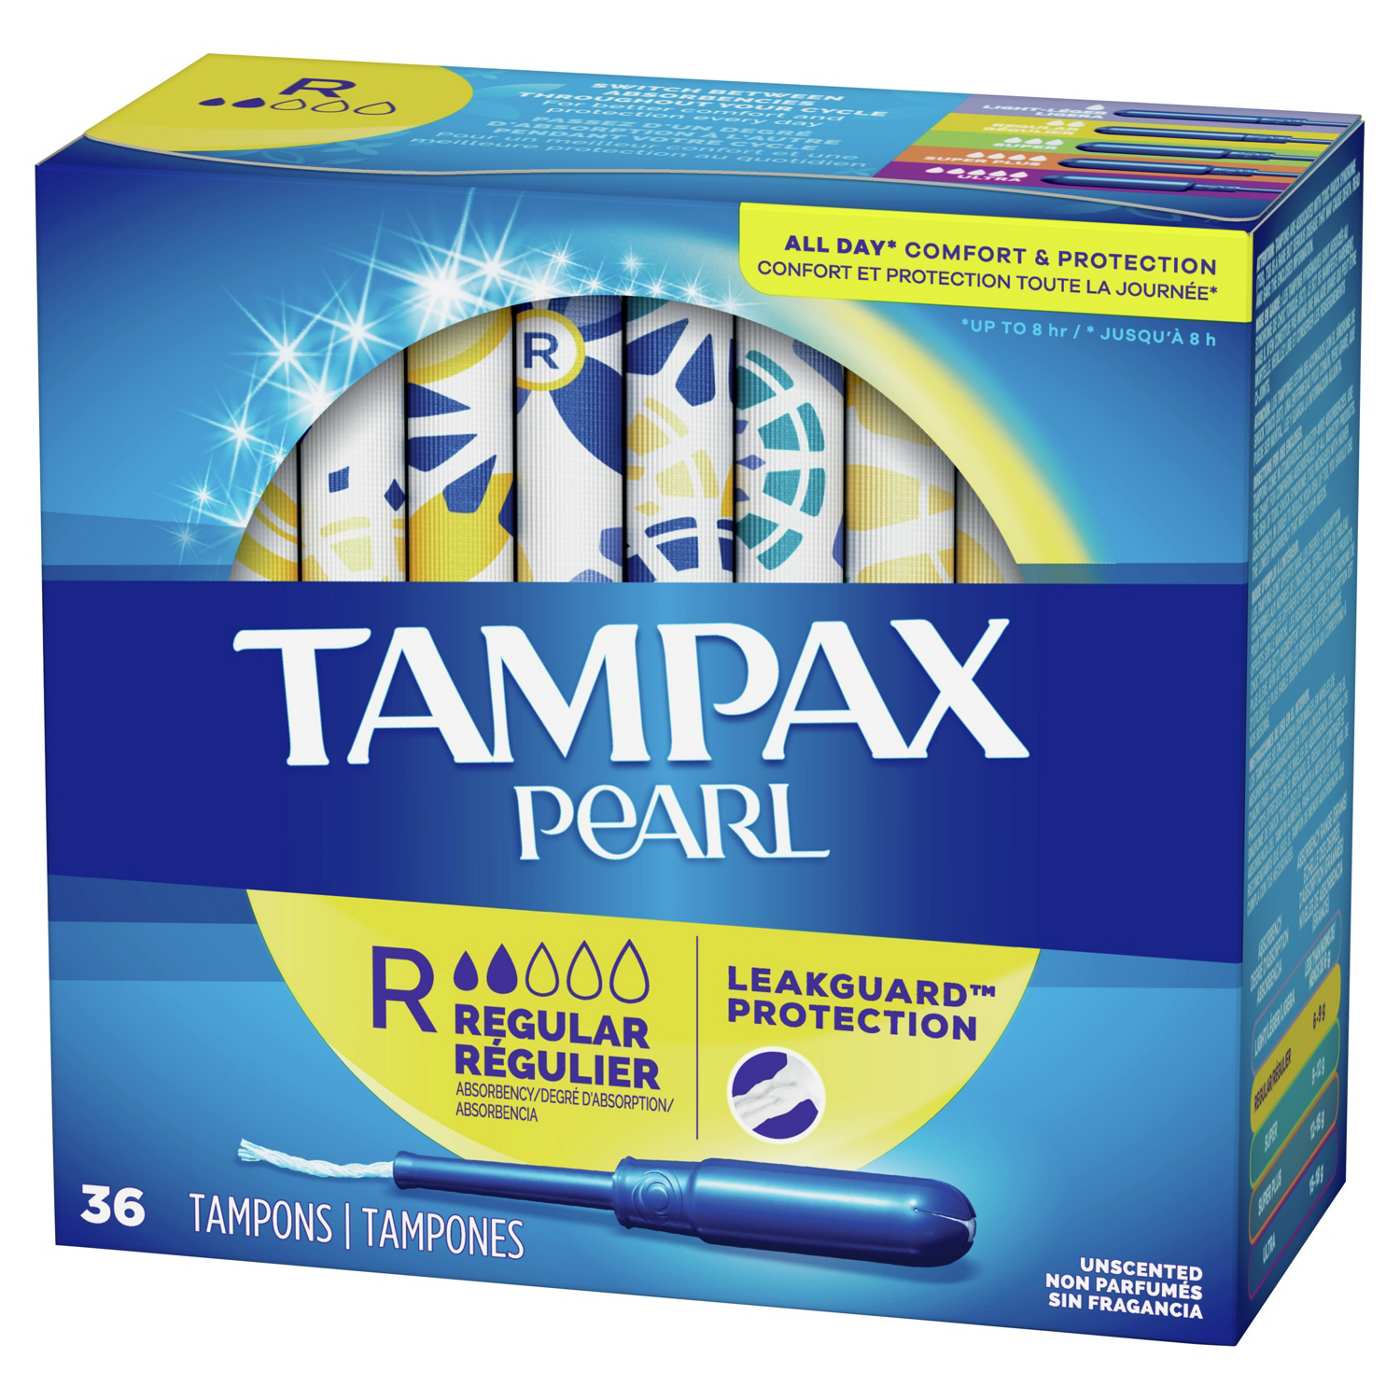 Tampax Pearl Tampons Regular Unscented; image 4 of 9